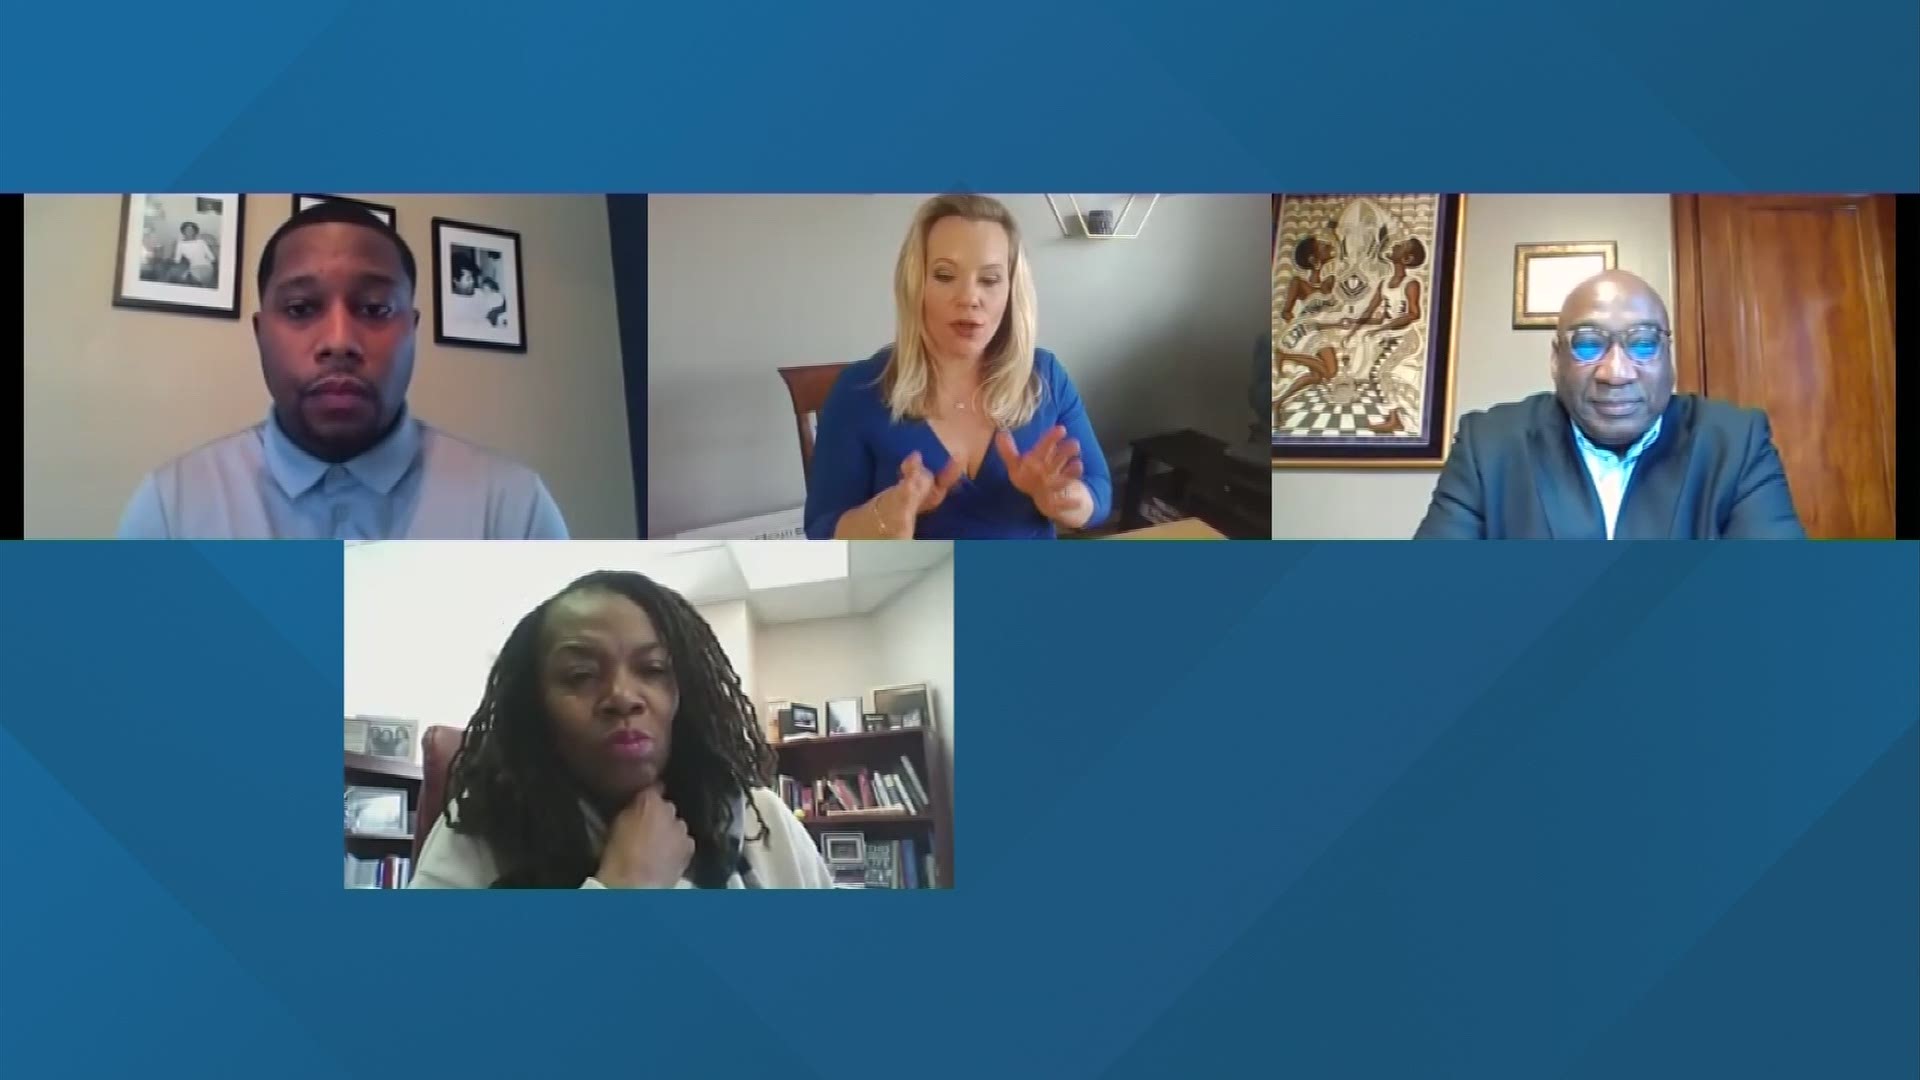 10TV talked Jerry Saunders, Stephanie Hightower and Chris Suel to discuss the violent start to 2021 and what can be done to change.